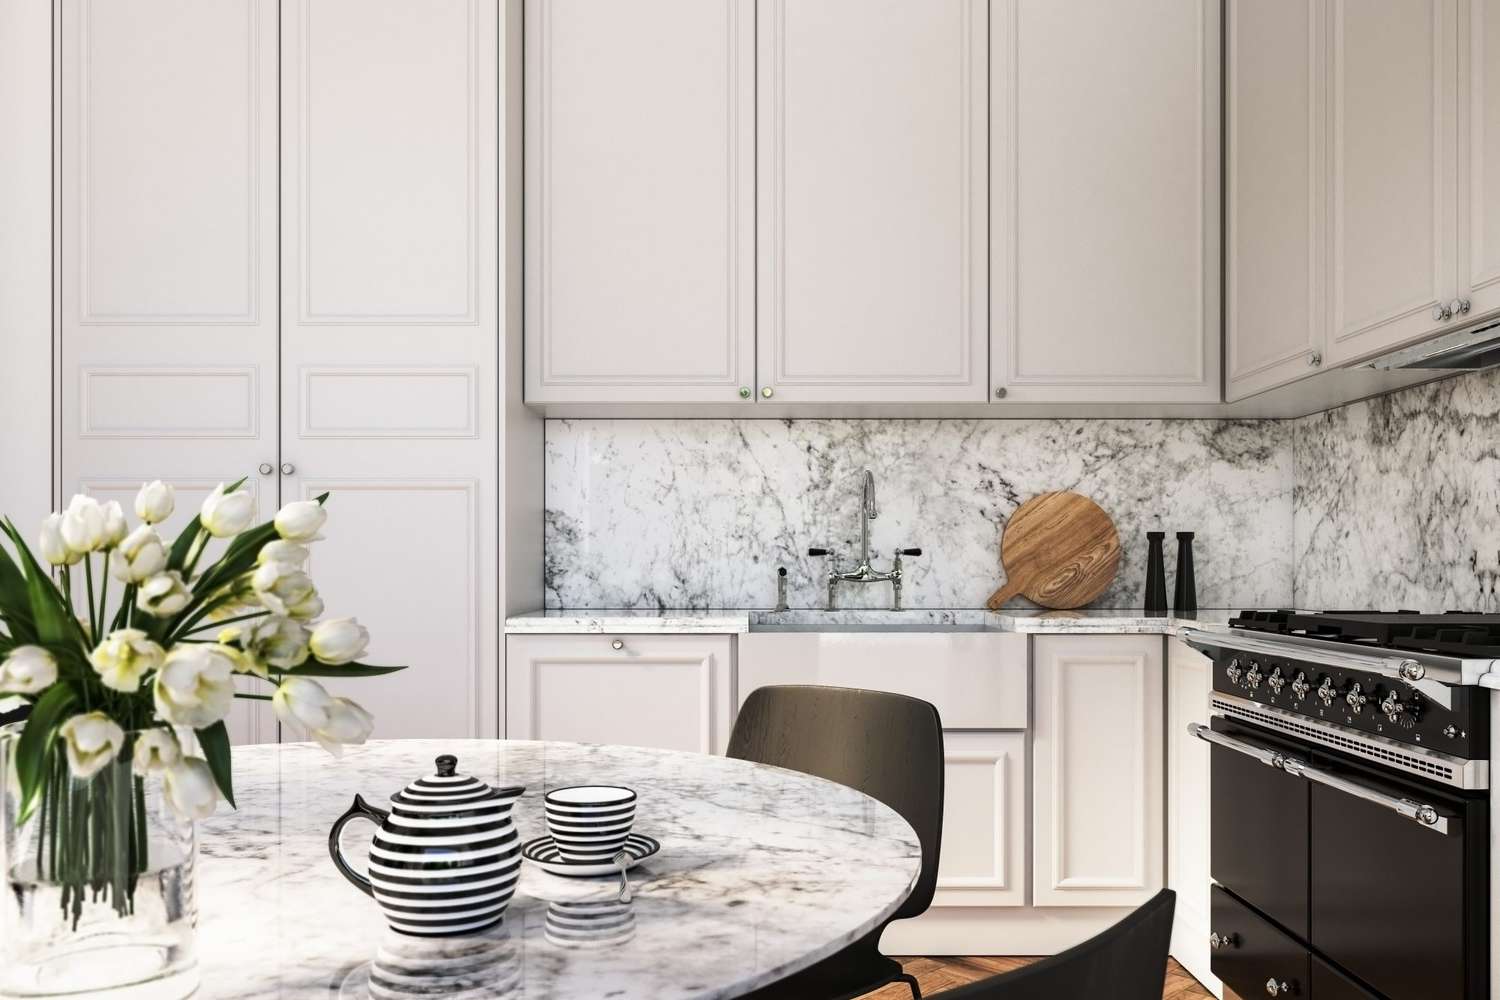 5 Kitchen Cabinet Paint Colors That Will Never Go Out of Style, According to Interior Designers